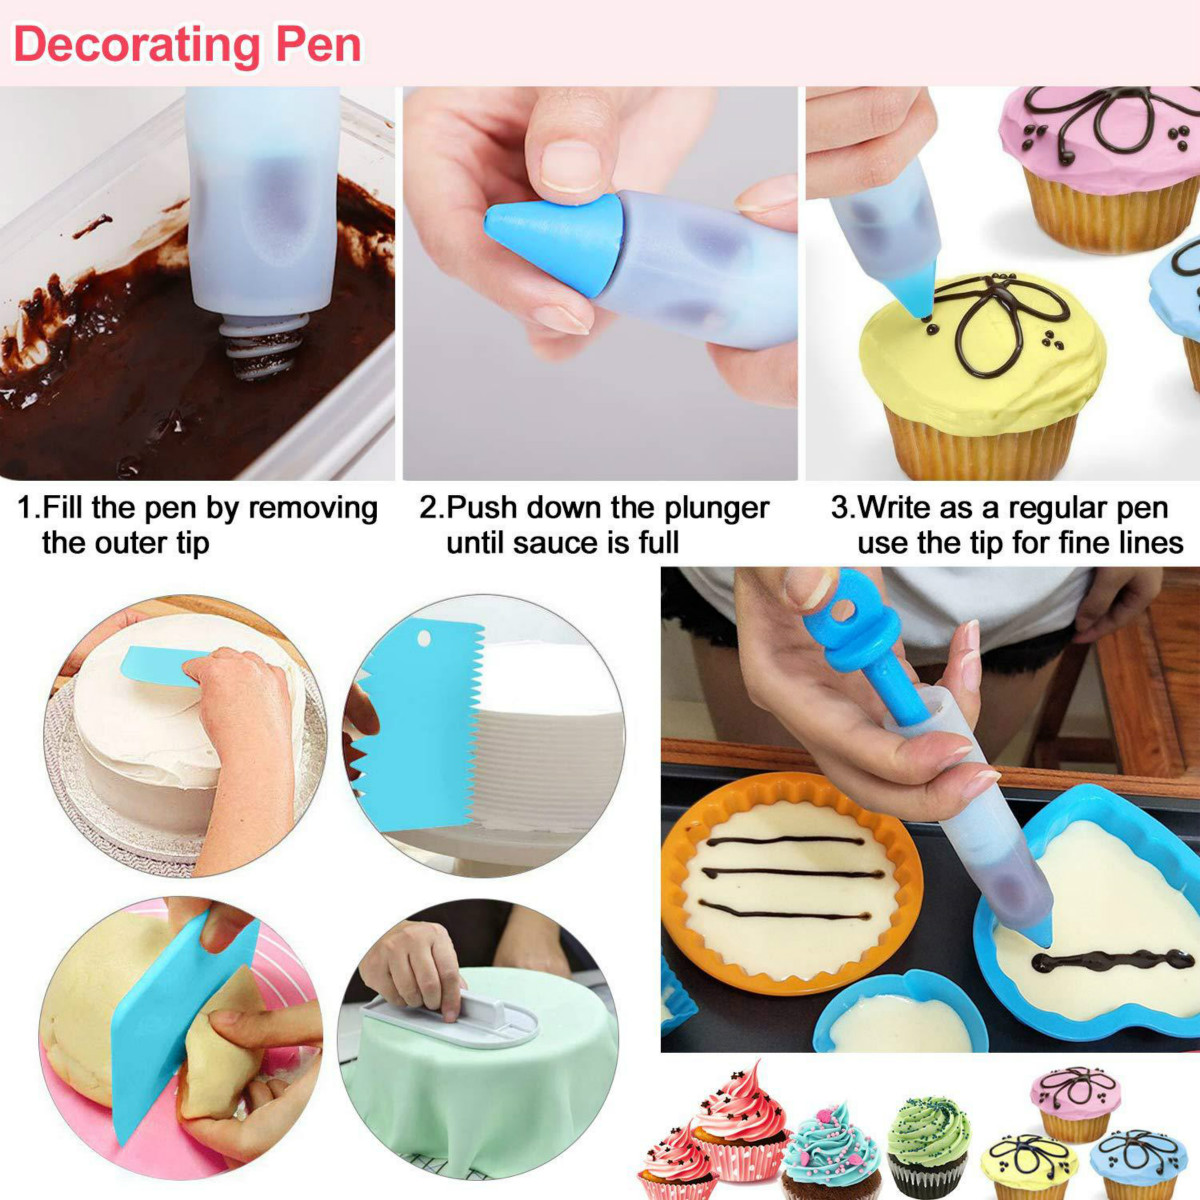 82 Pcs Icing Piping Tips Set with Storage Box Cake Decorating Supplies Kit Icing Nozzles Pastry Piping Bags Smoother